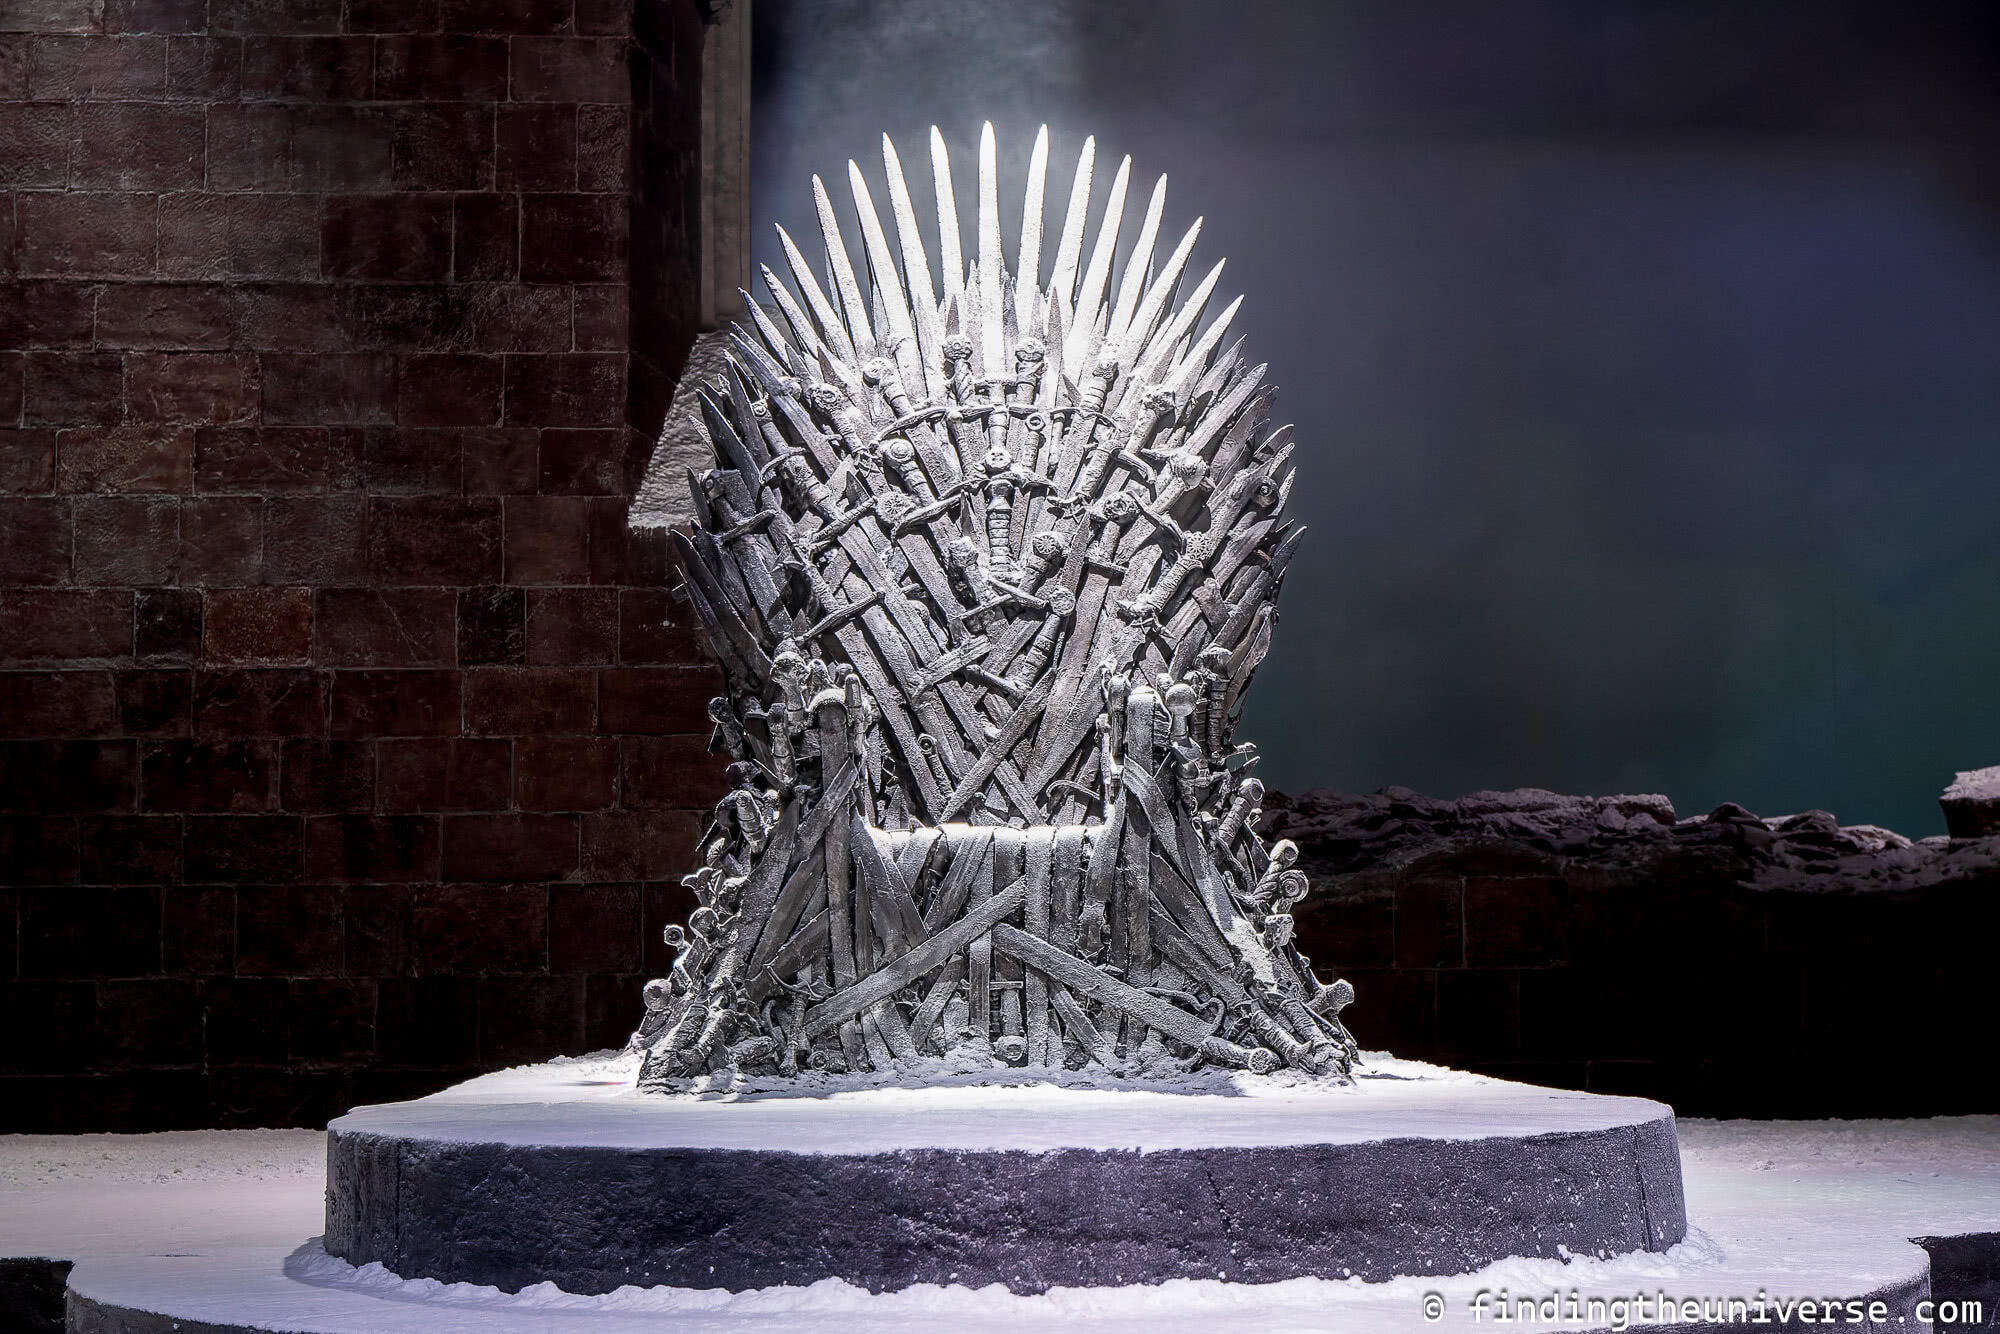 Game of Thrones Studio Tour Iron Throne by Laurence Norah-2